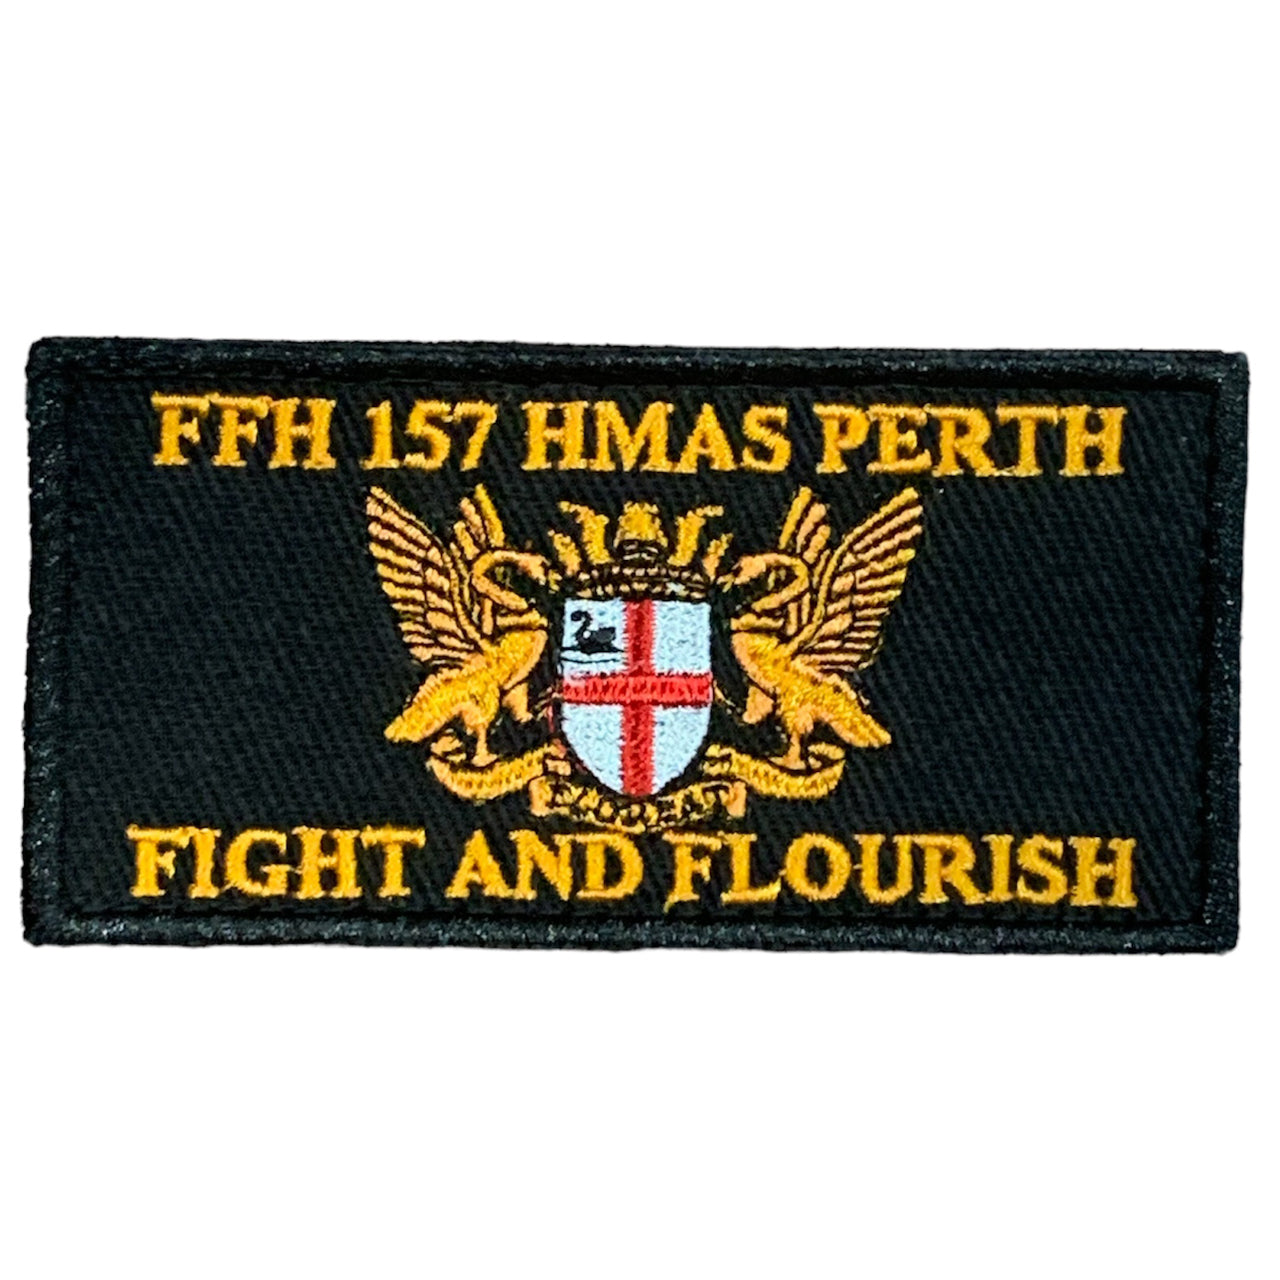 The HMAS Perth DPNU Patch is a must-have for any military enthusiast. This embroidered patch features the iconic HMAS Perth design, measuring 100x50mm. www.defenceqstore.com.au